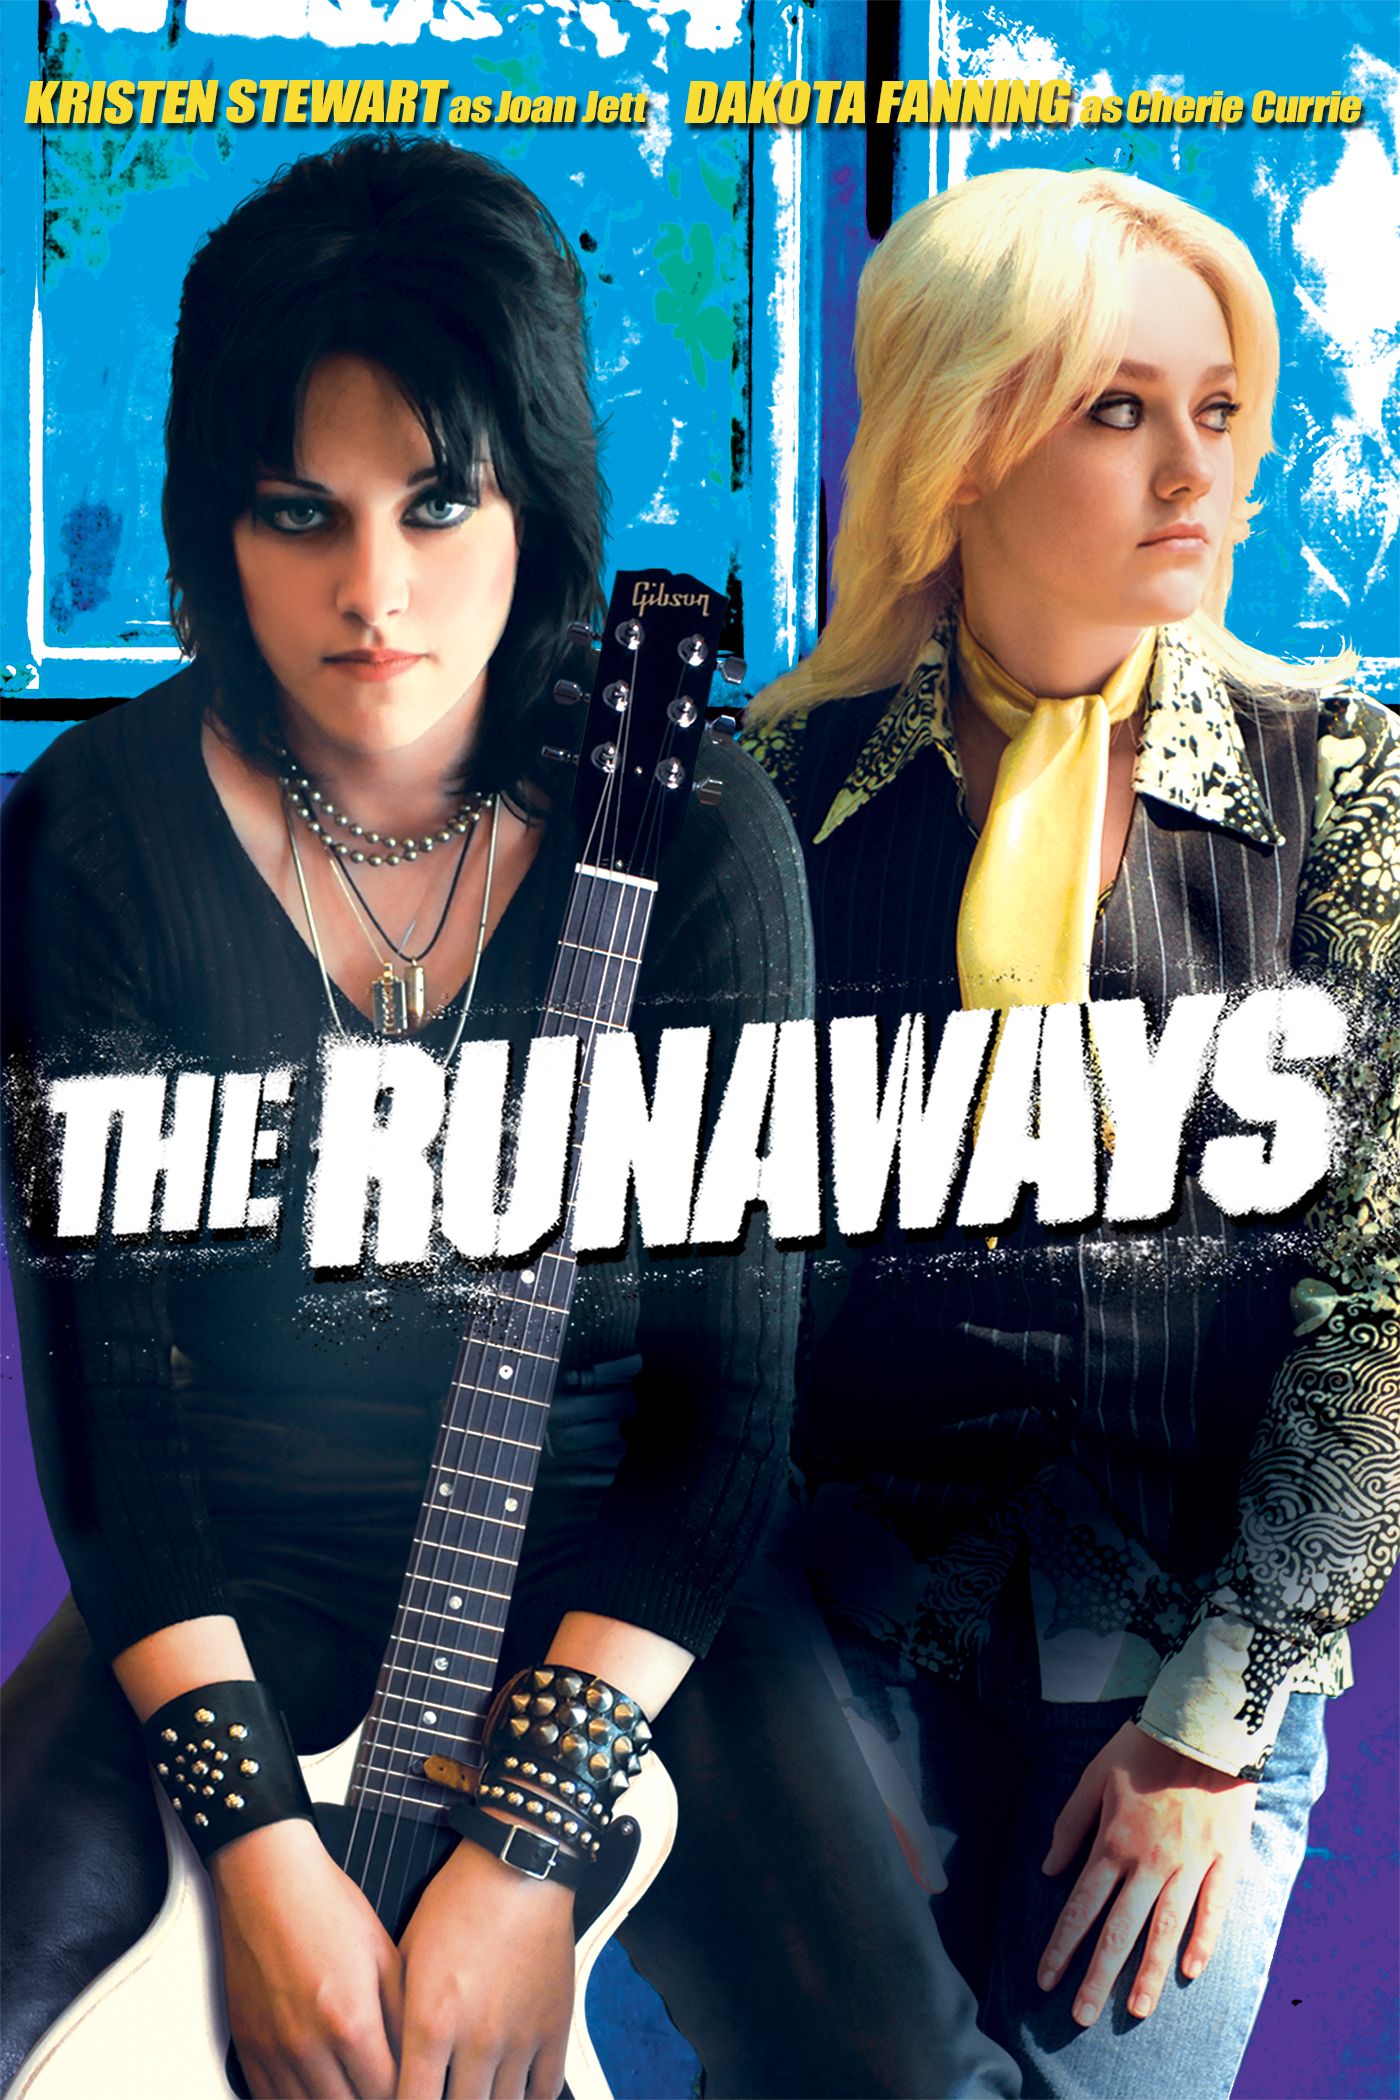 The Runaways 2010 Full Movie Online In Hd Quality